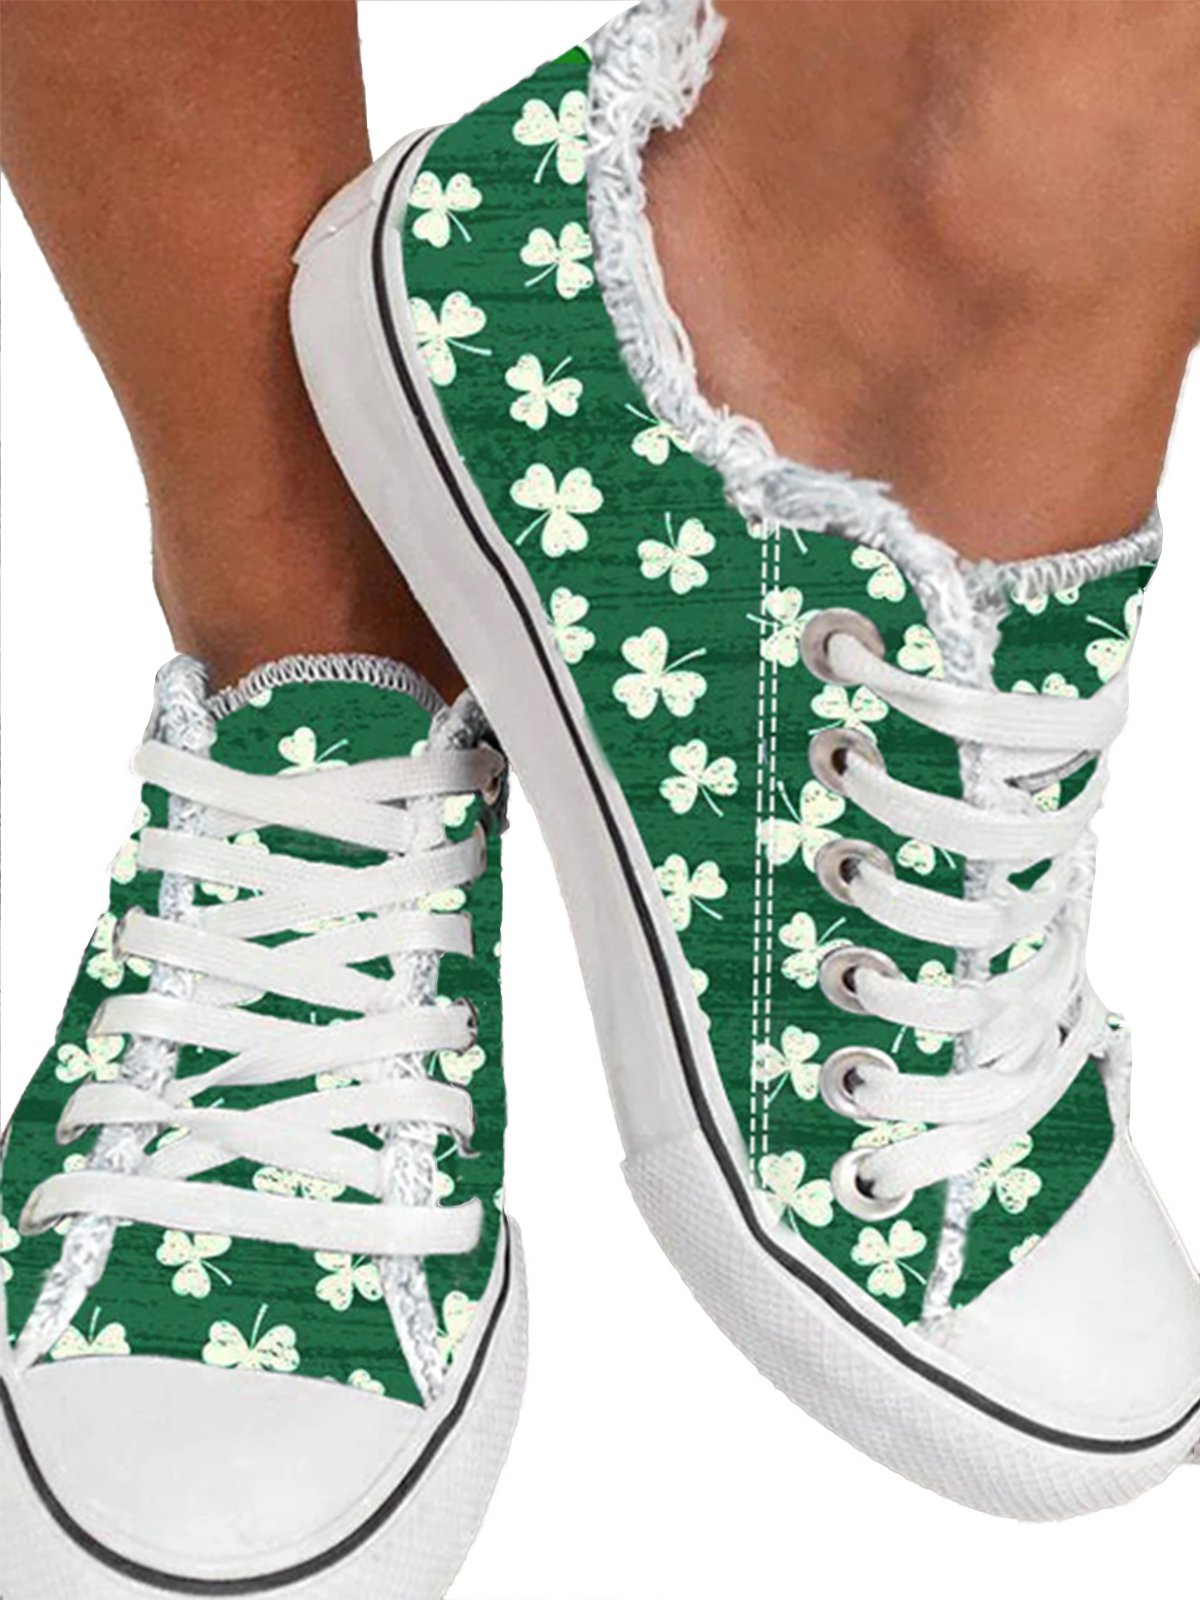 Women's Sneakers St. Patrick's Day Lucky Shamrock Print Green Canvas Shoes